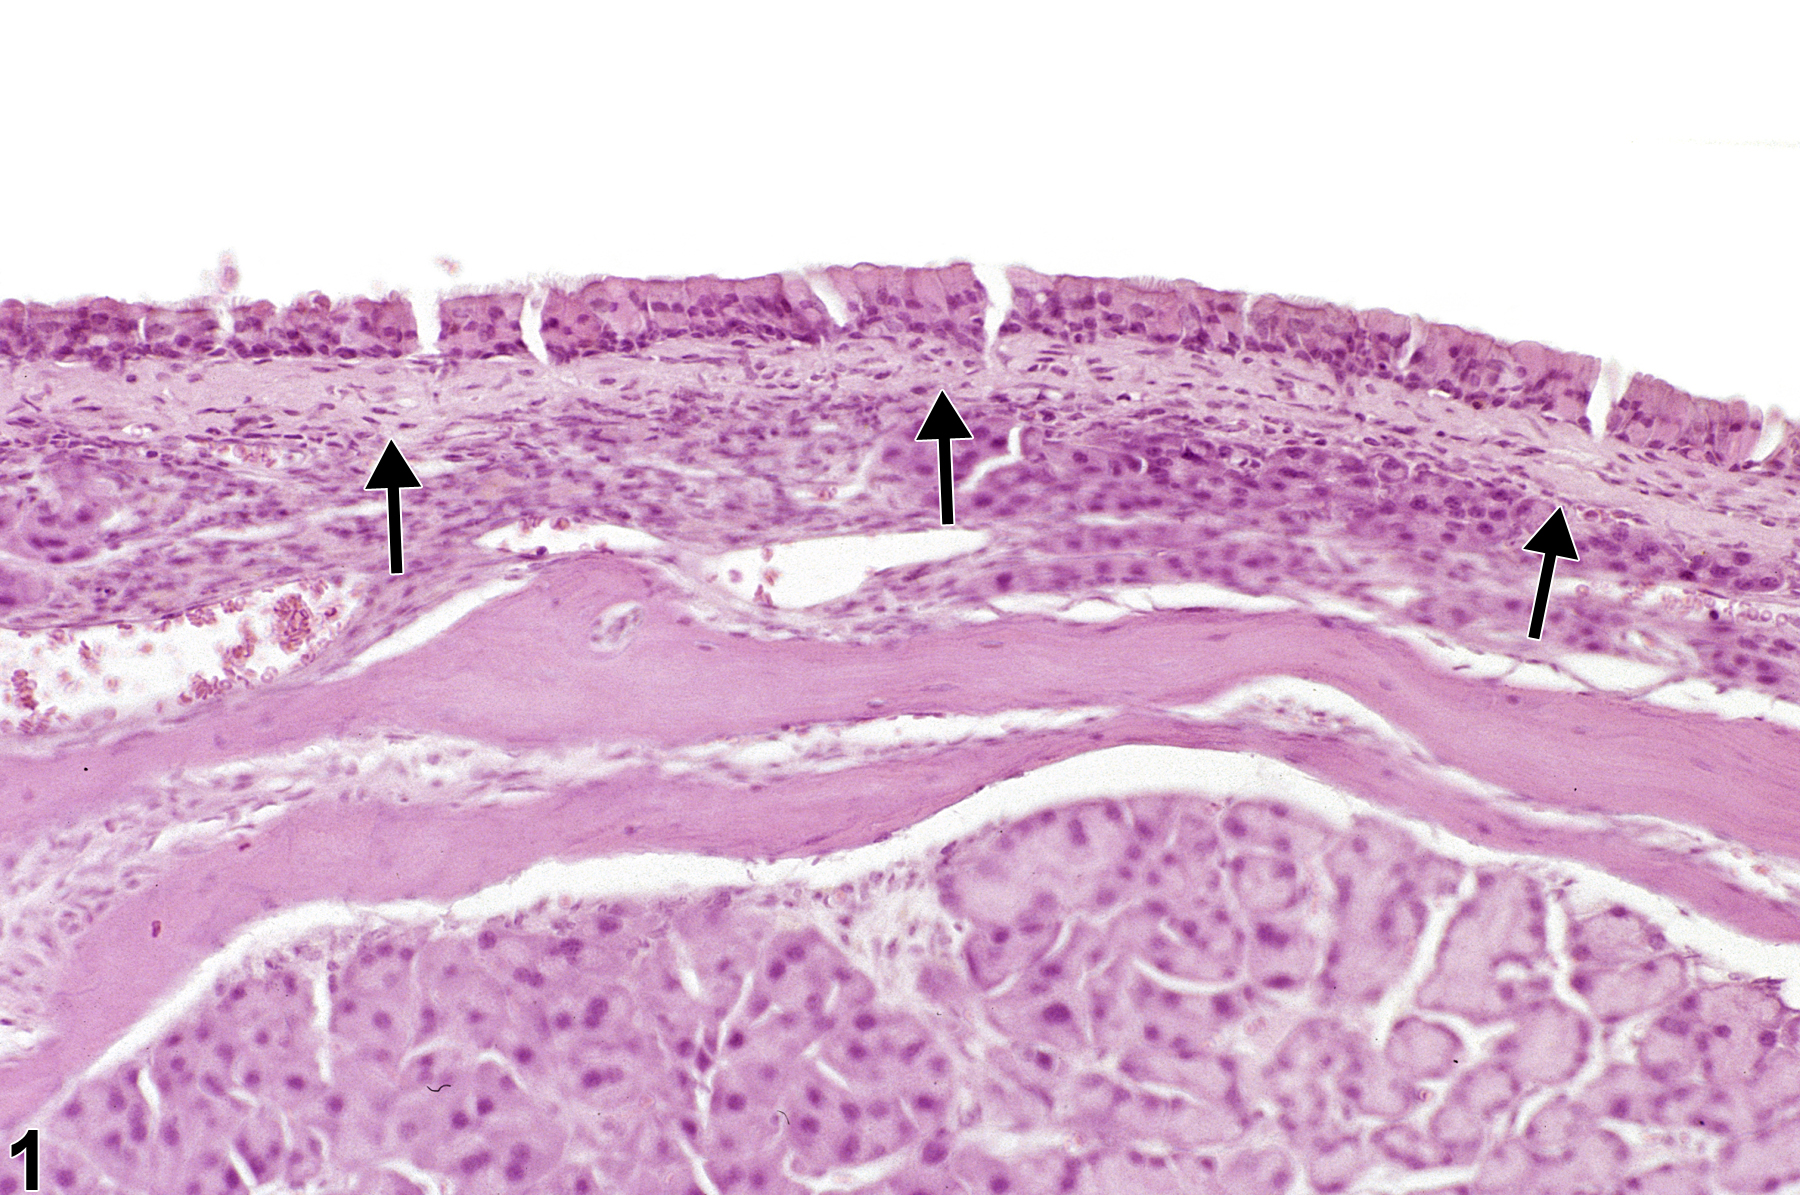 Image of fibrosis in the nose, transitional epithelium from a female B6C3F1/N mouse in a chronic study